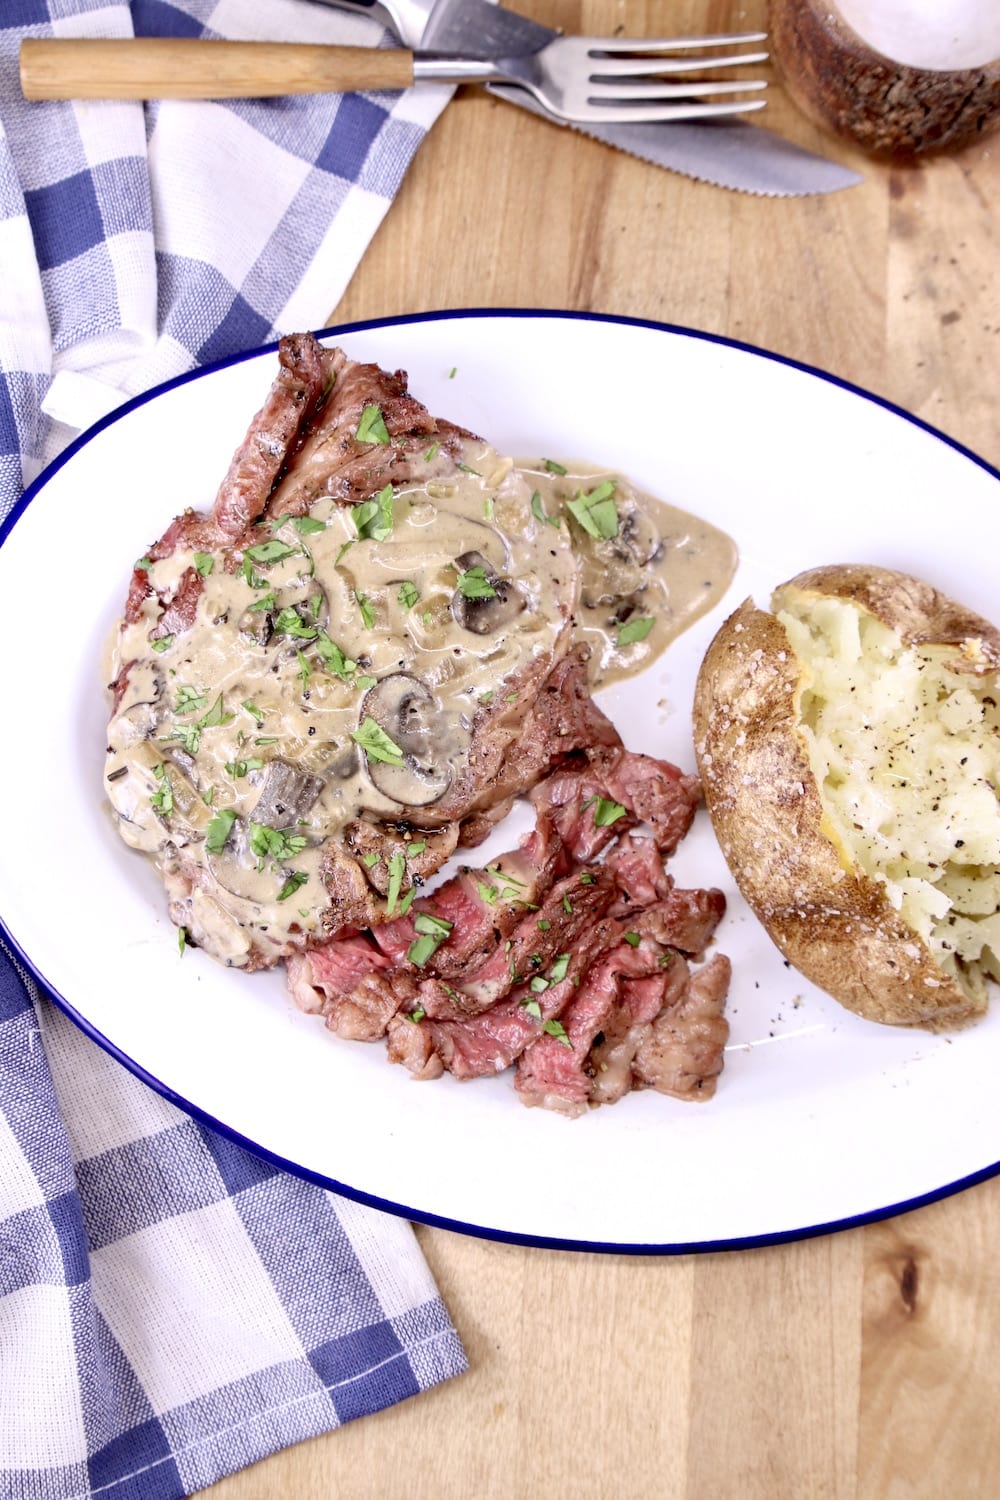 Grilled steak with mushroom cream sauce served with baked potato